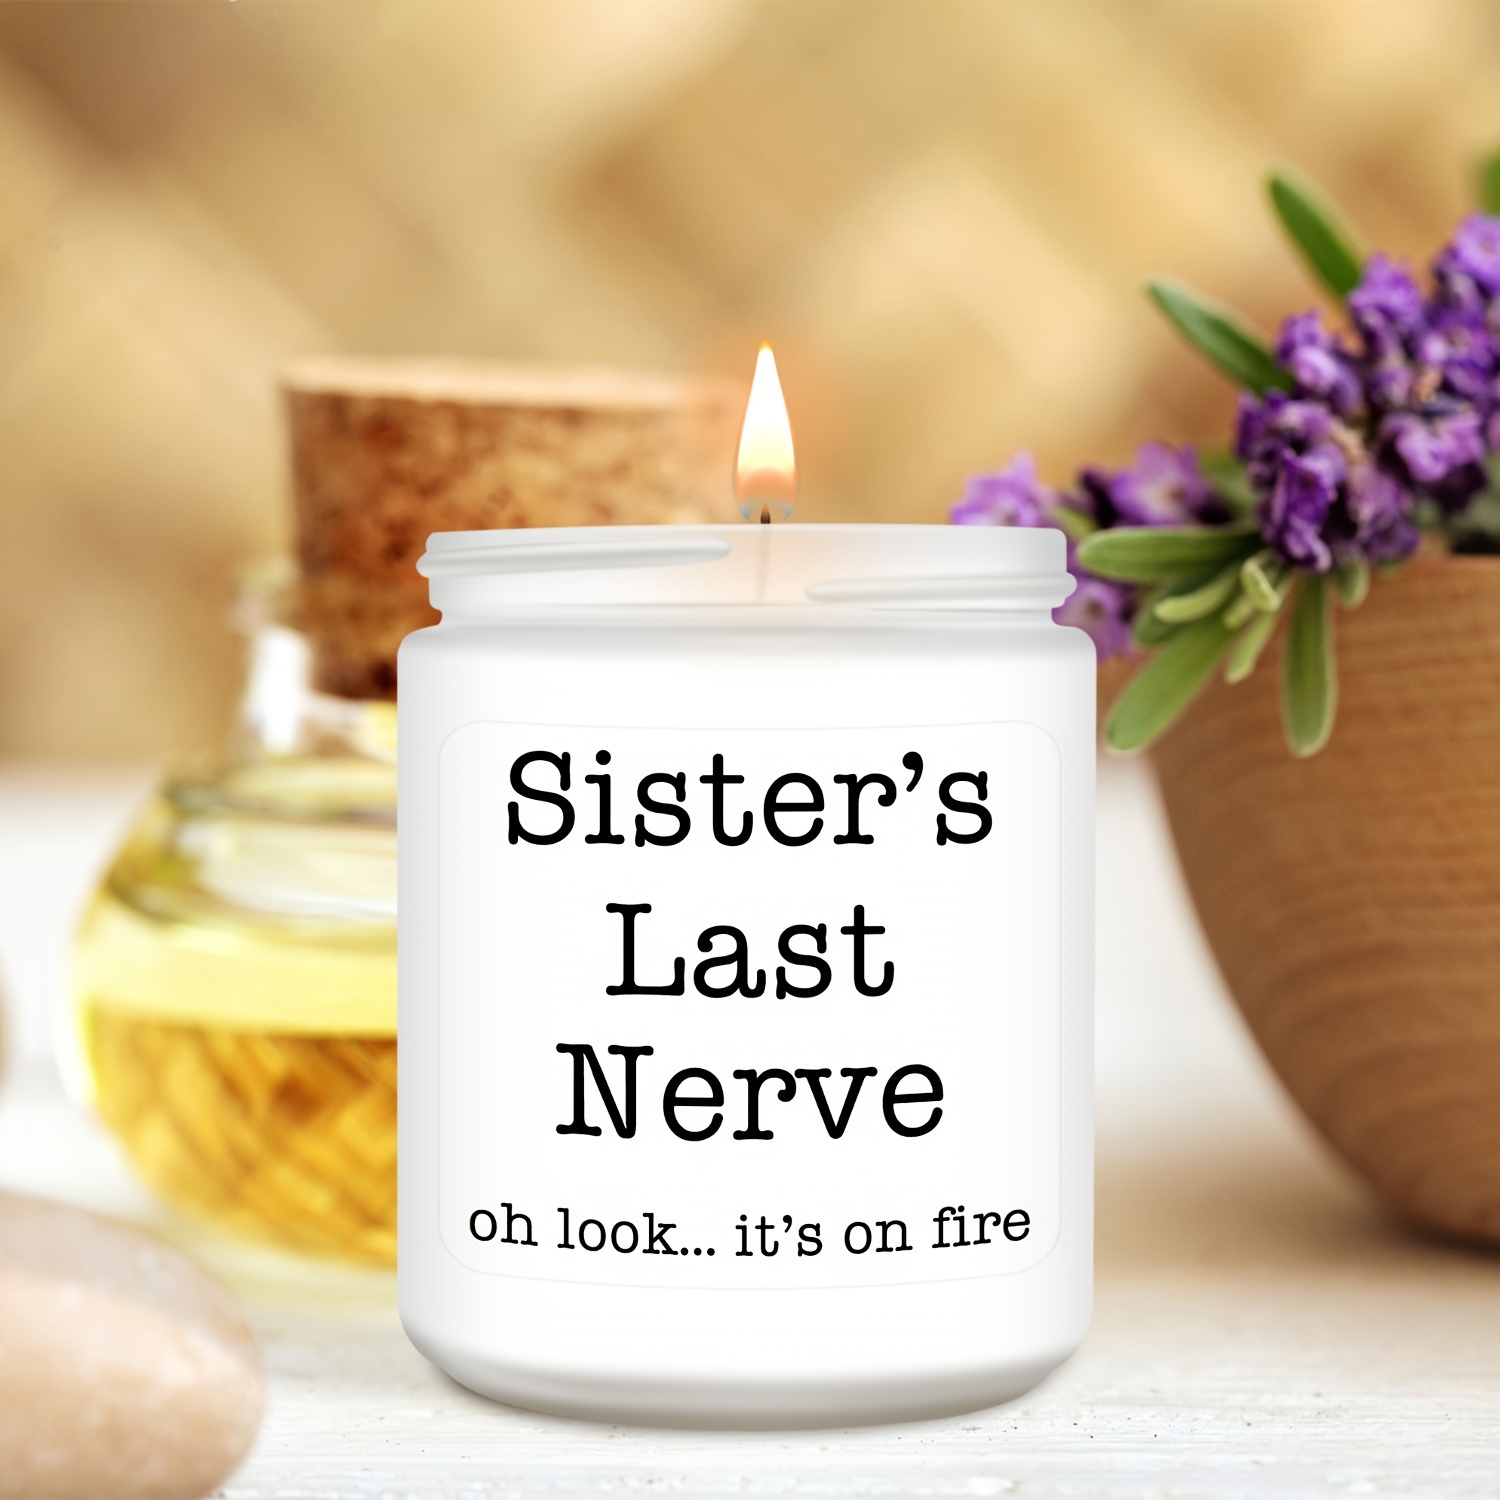 

1pc Lavender Scented Candle Sister Gift, Gift For Sister From Sister Brother, Happy Sister Birthday Gift Ideas, Mothers Day Christmas Gift For Sister Female Friends Sister In Law